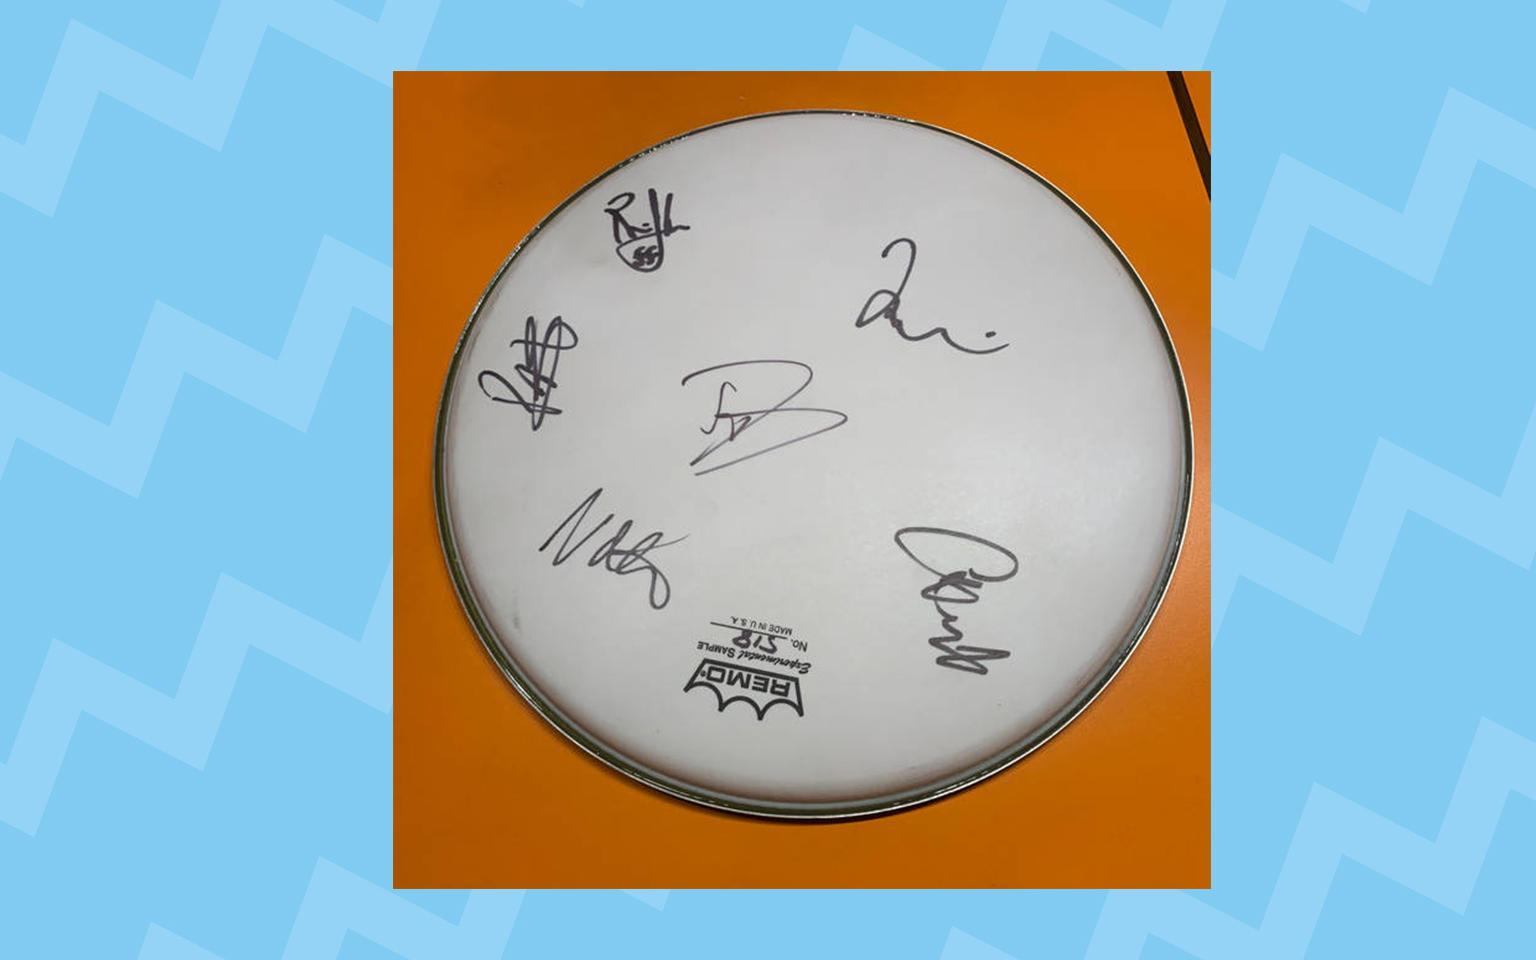 Text to WIN a drum skin signed by the Foo Fighters